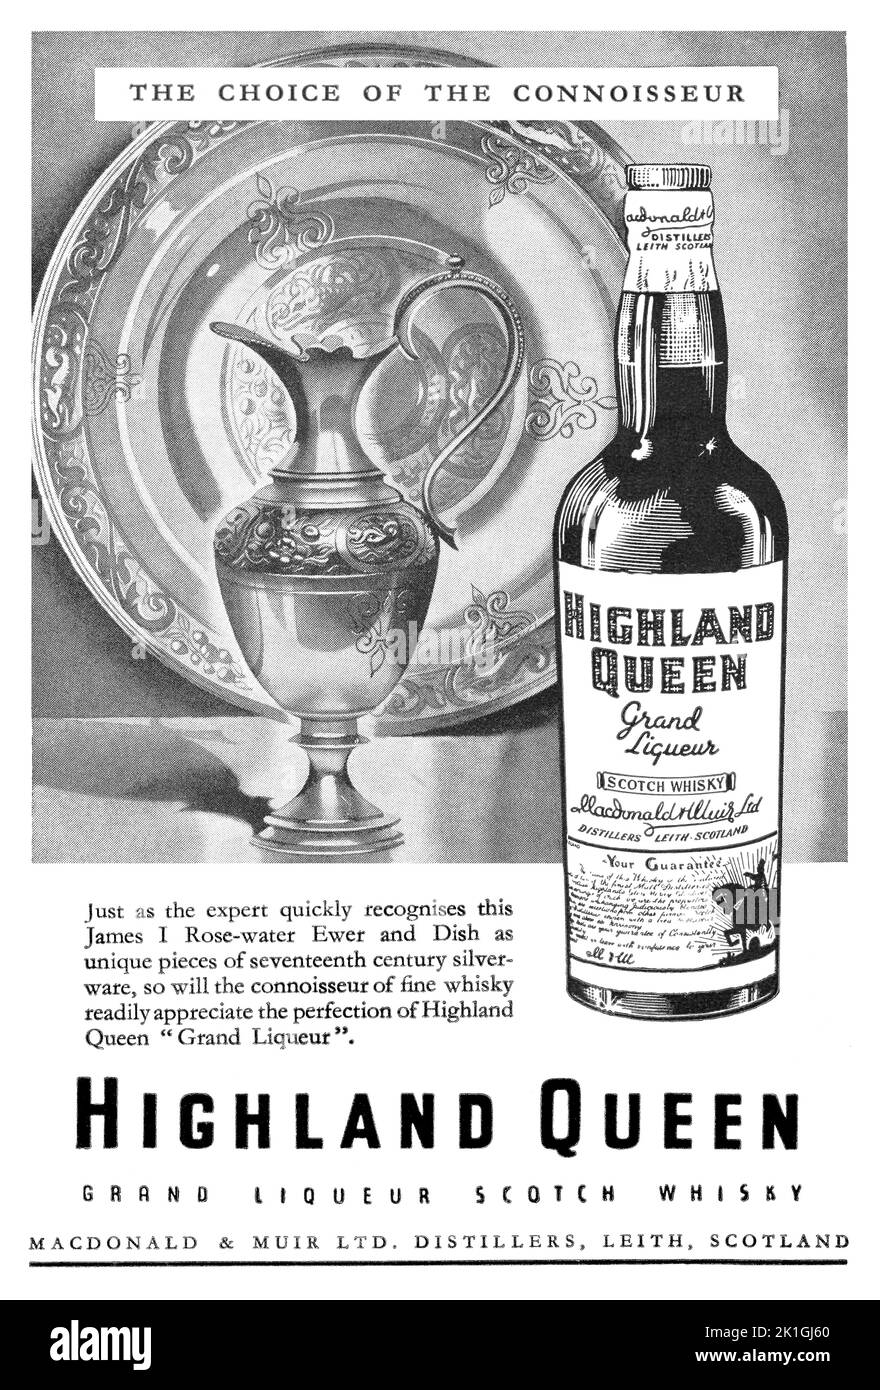 1948 British advertisement for Highland Queen Grand Liqueur Scotch Whisky by Macdonald and Muir Ltd. Stock Photo